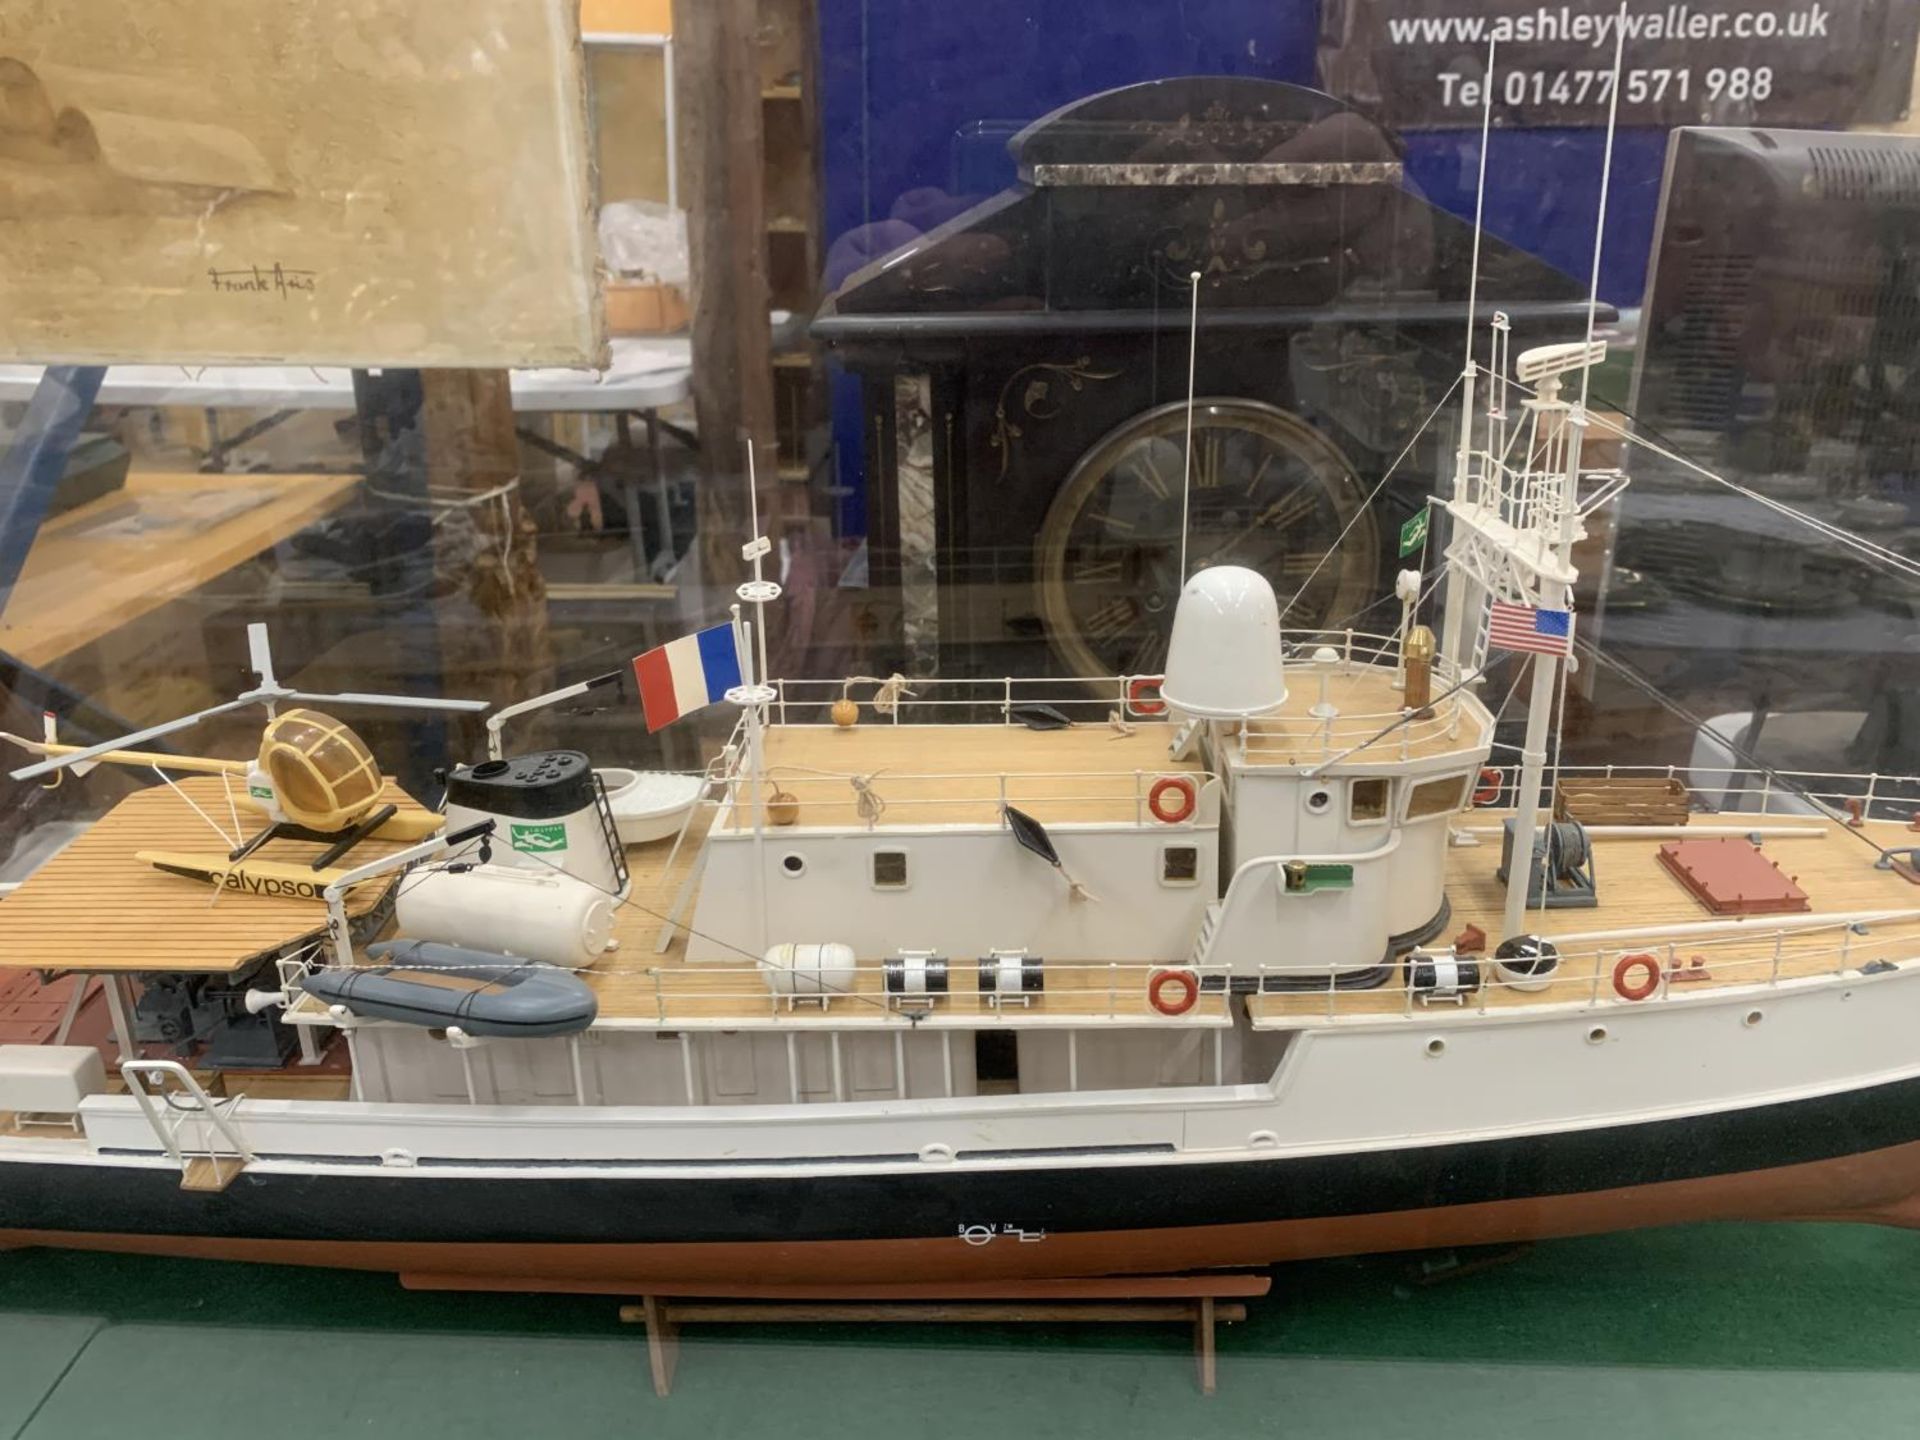 A LARGE MODEL OF A BOAT WITH HELICOPTER IN A GLASS CASE - Image 3 of 5